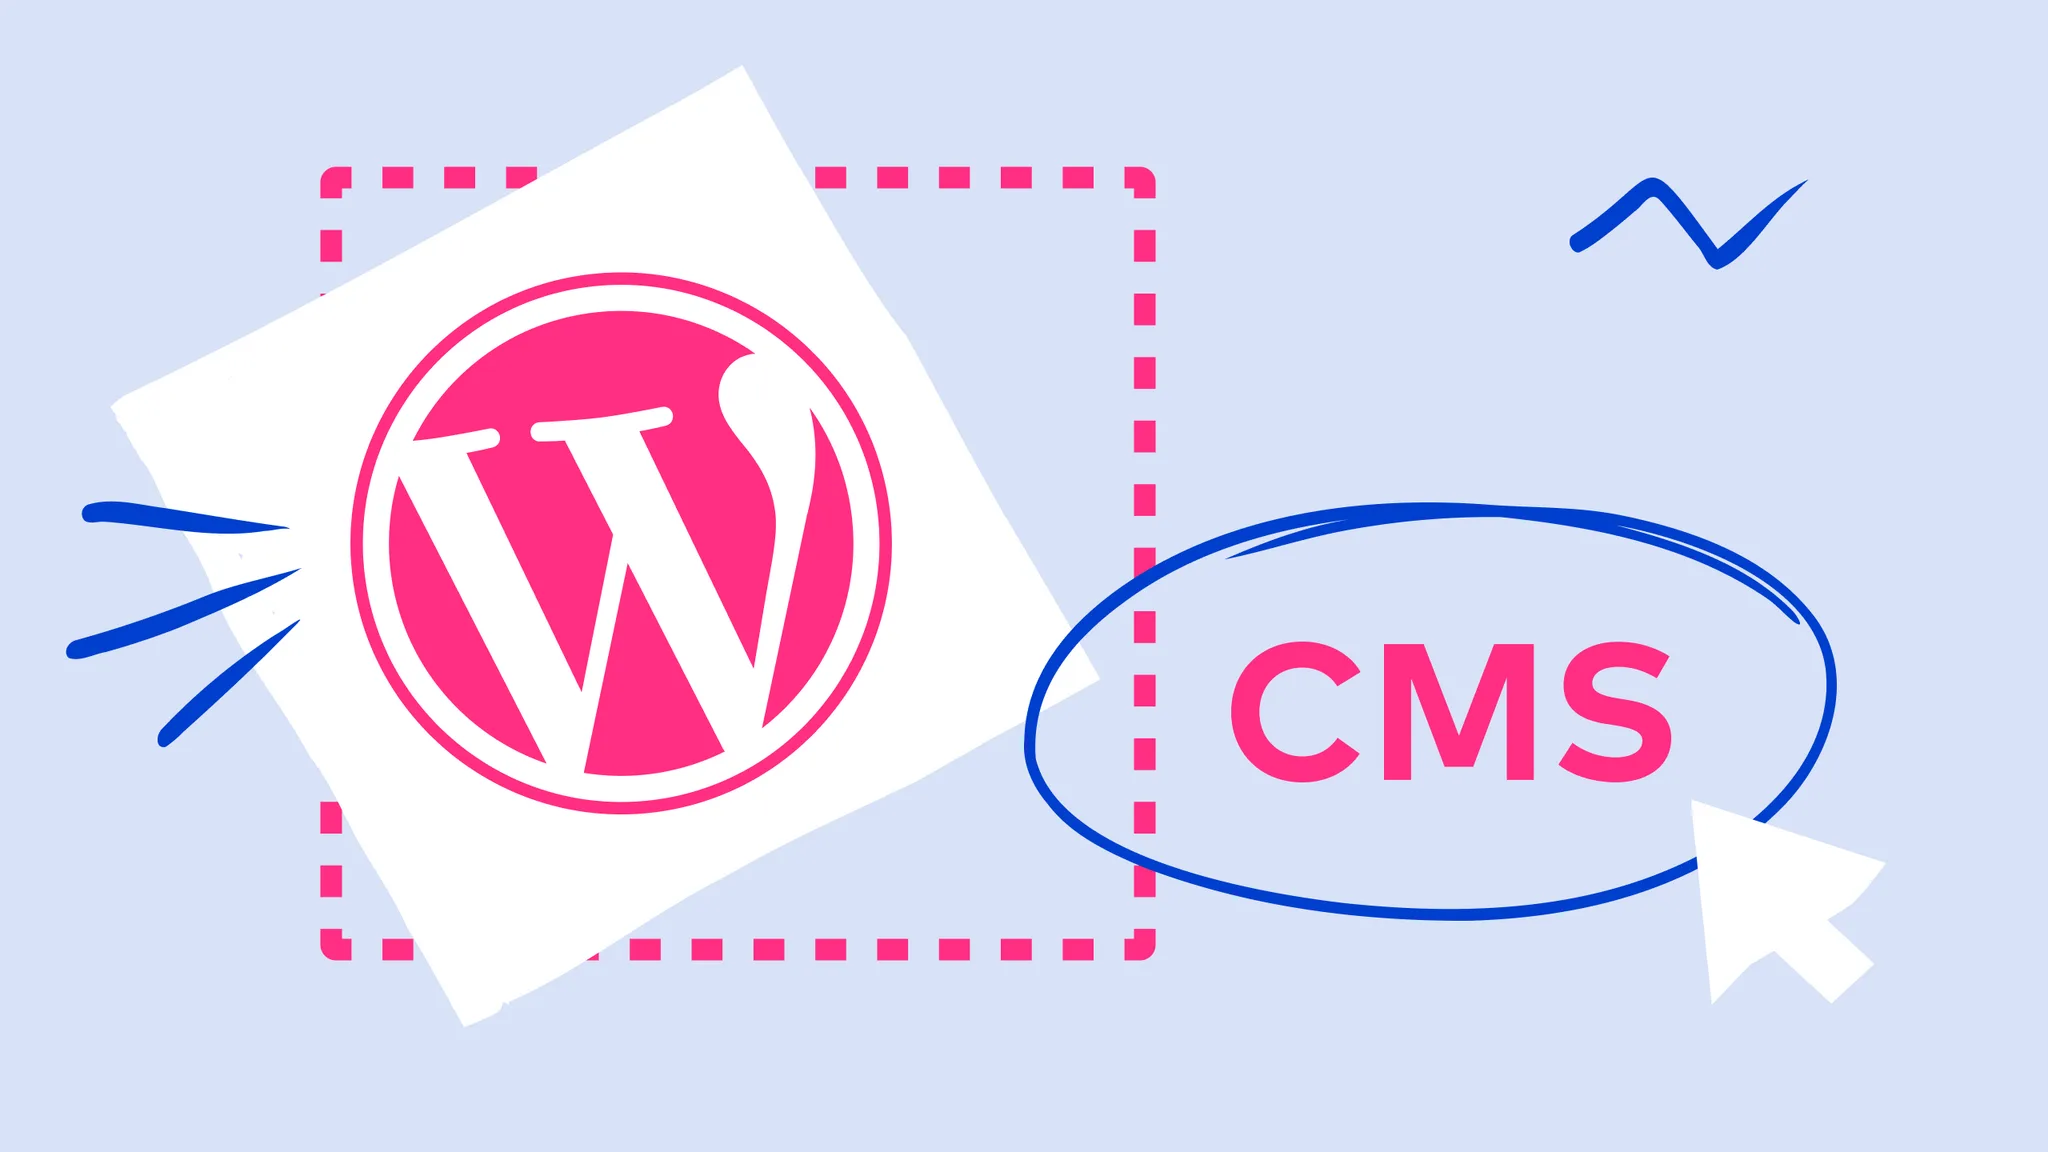 Another option you could consider: WordPress as a Headless CMS